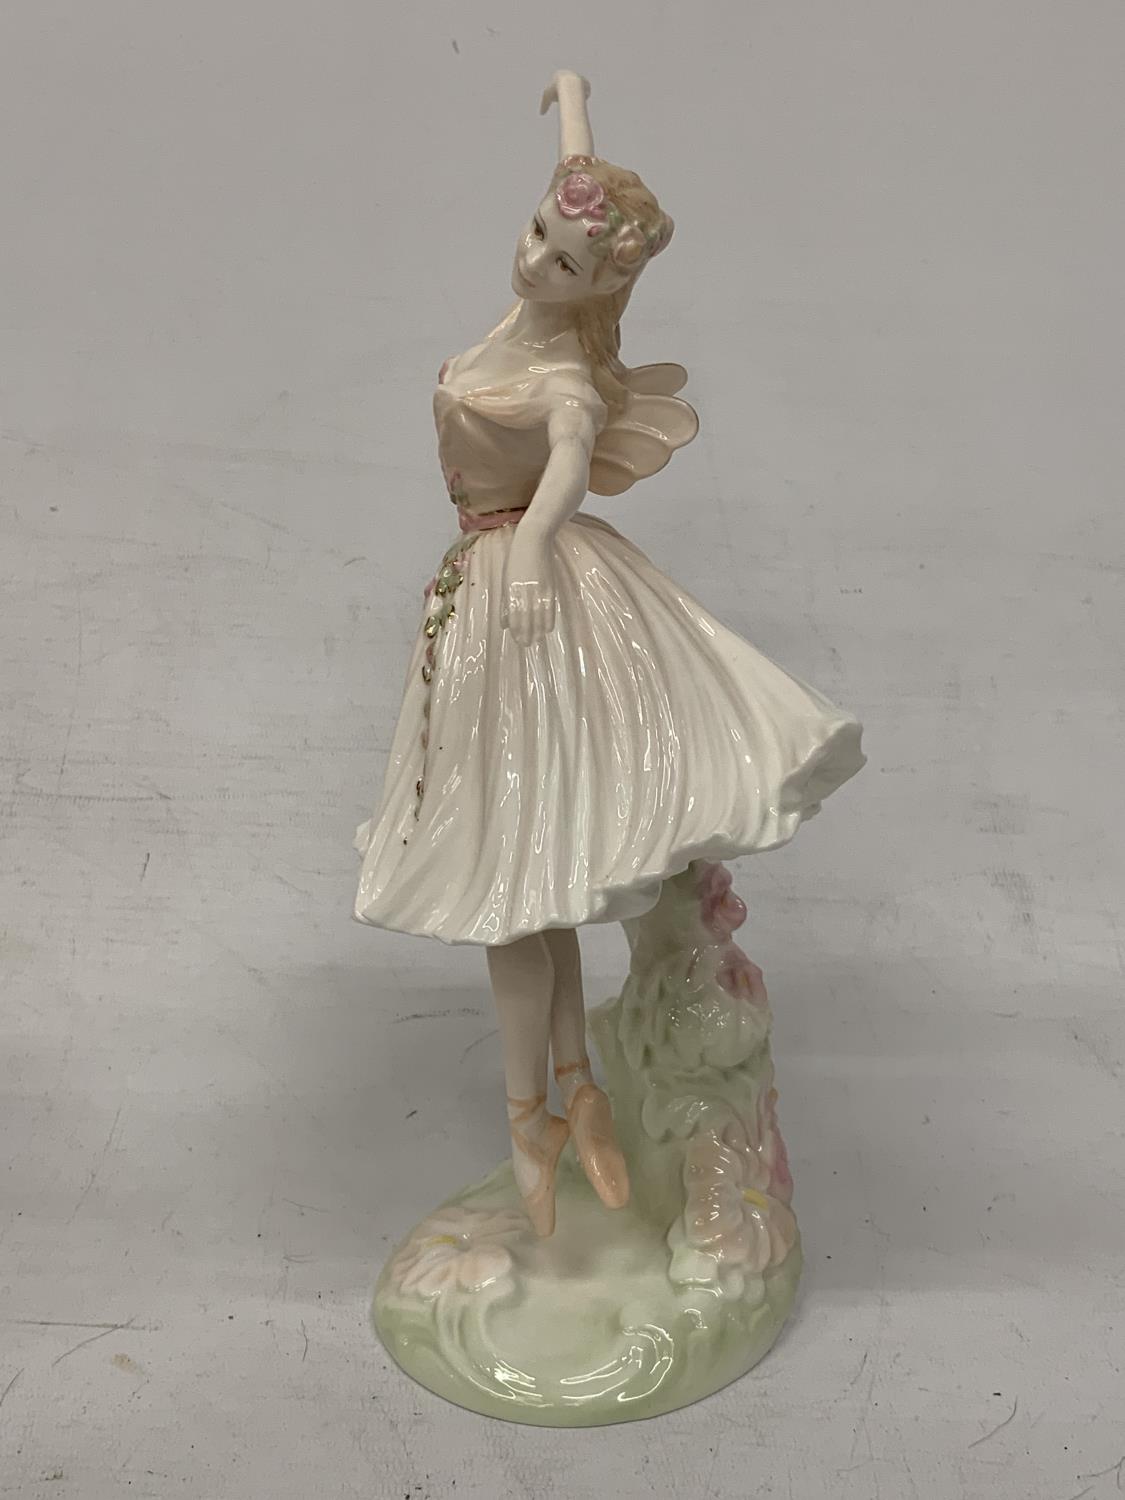 A COALPORT FIGURINE "DAME ANTOINETTE SIBLEY" FROM THE ROYAL ACADEMY OF DANCING COLLECTION - Image 2 of 5